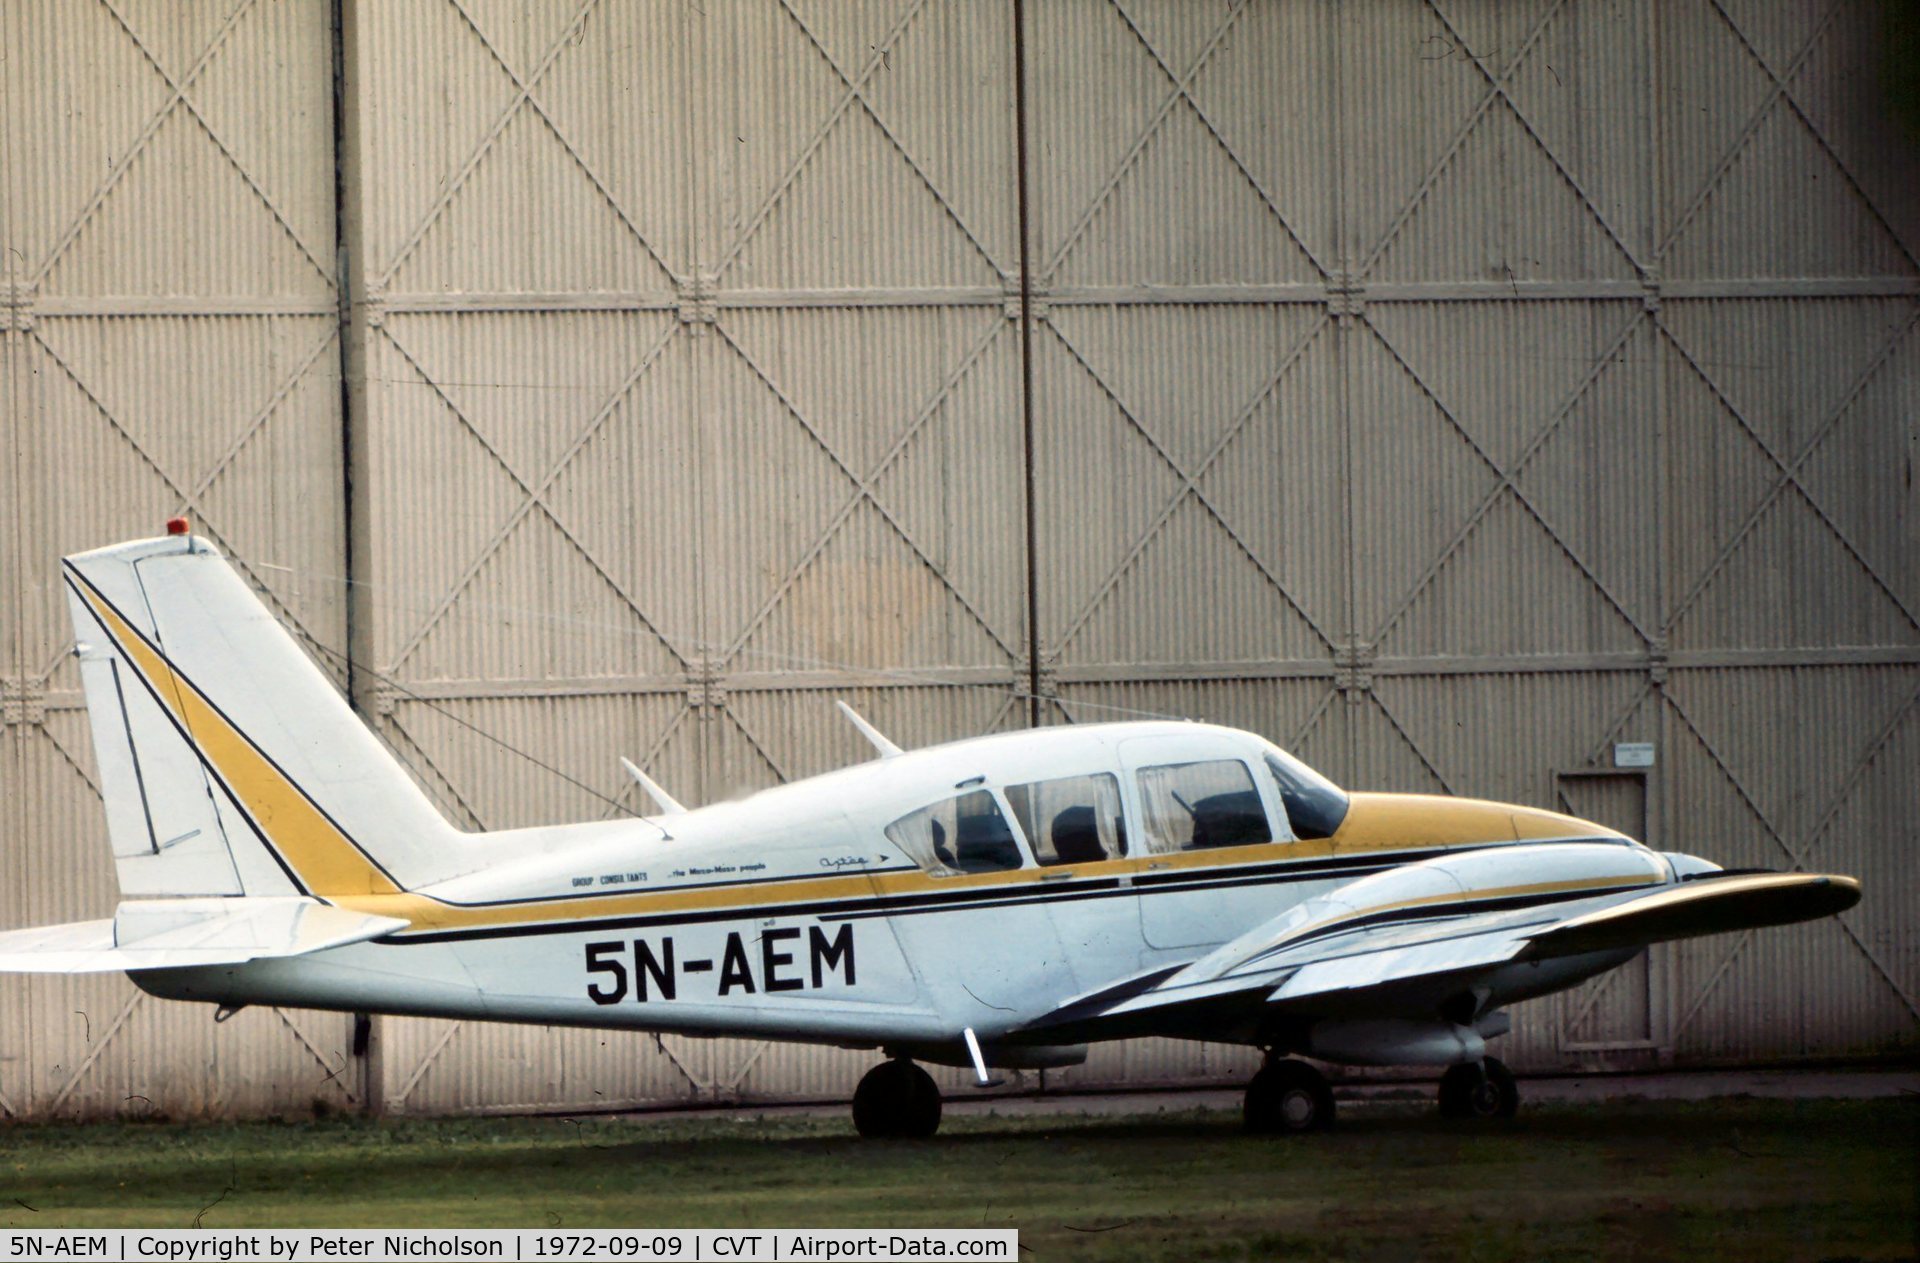 5N-AEM, 1970 Piper PA-23-250 Aztec C/N 274546, PA-23 Aztec 250 seen at Coventry Airport in September 1972 retained Nigerian markings until at least 1975.